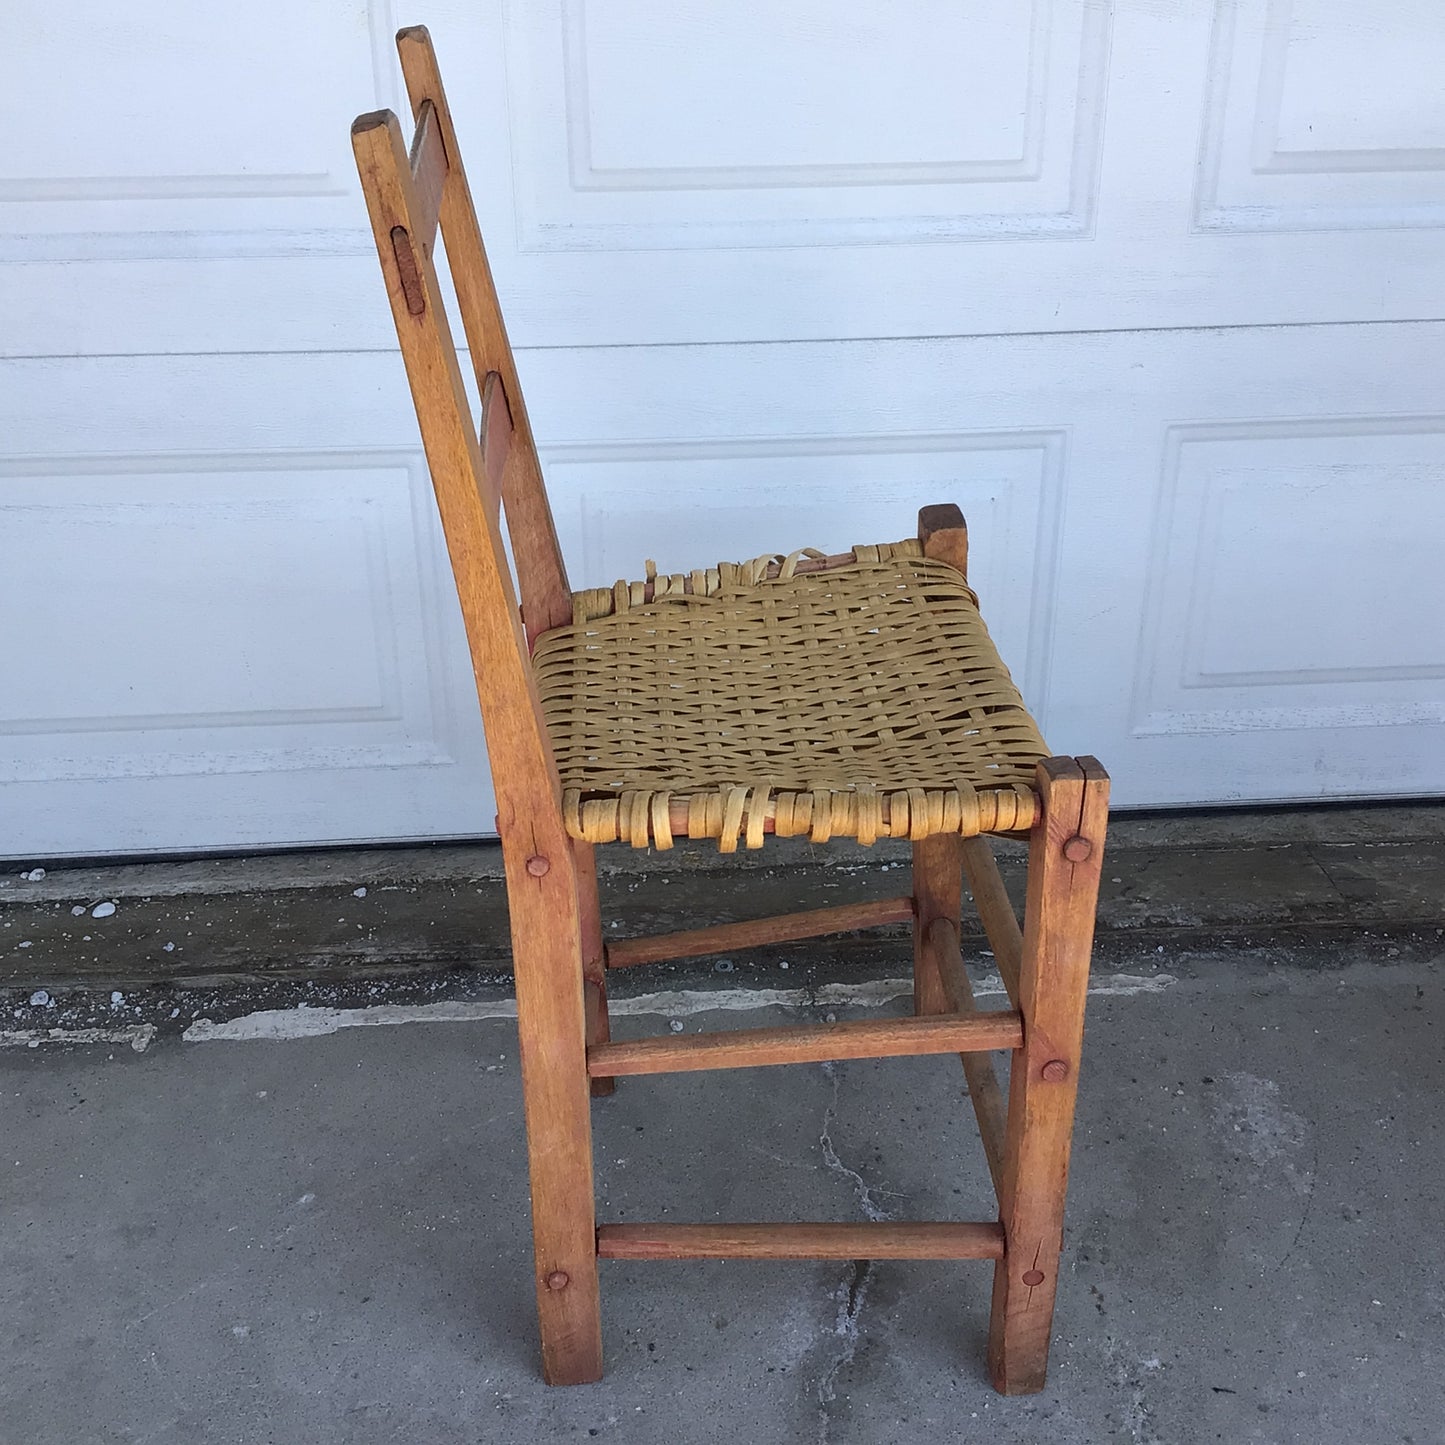 Set of 2 Antique East Coast Ladder Back Chairs